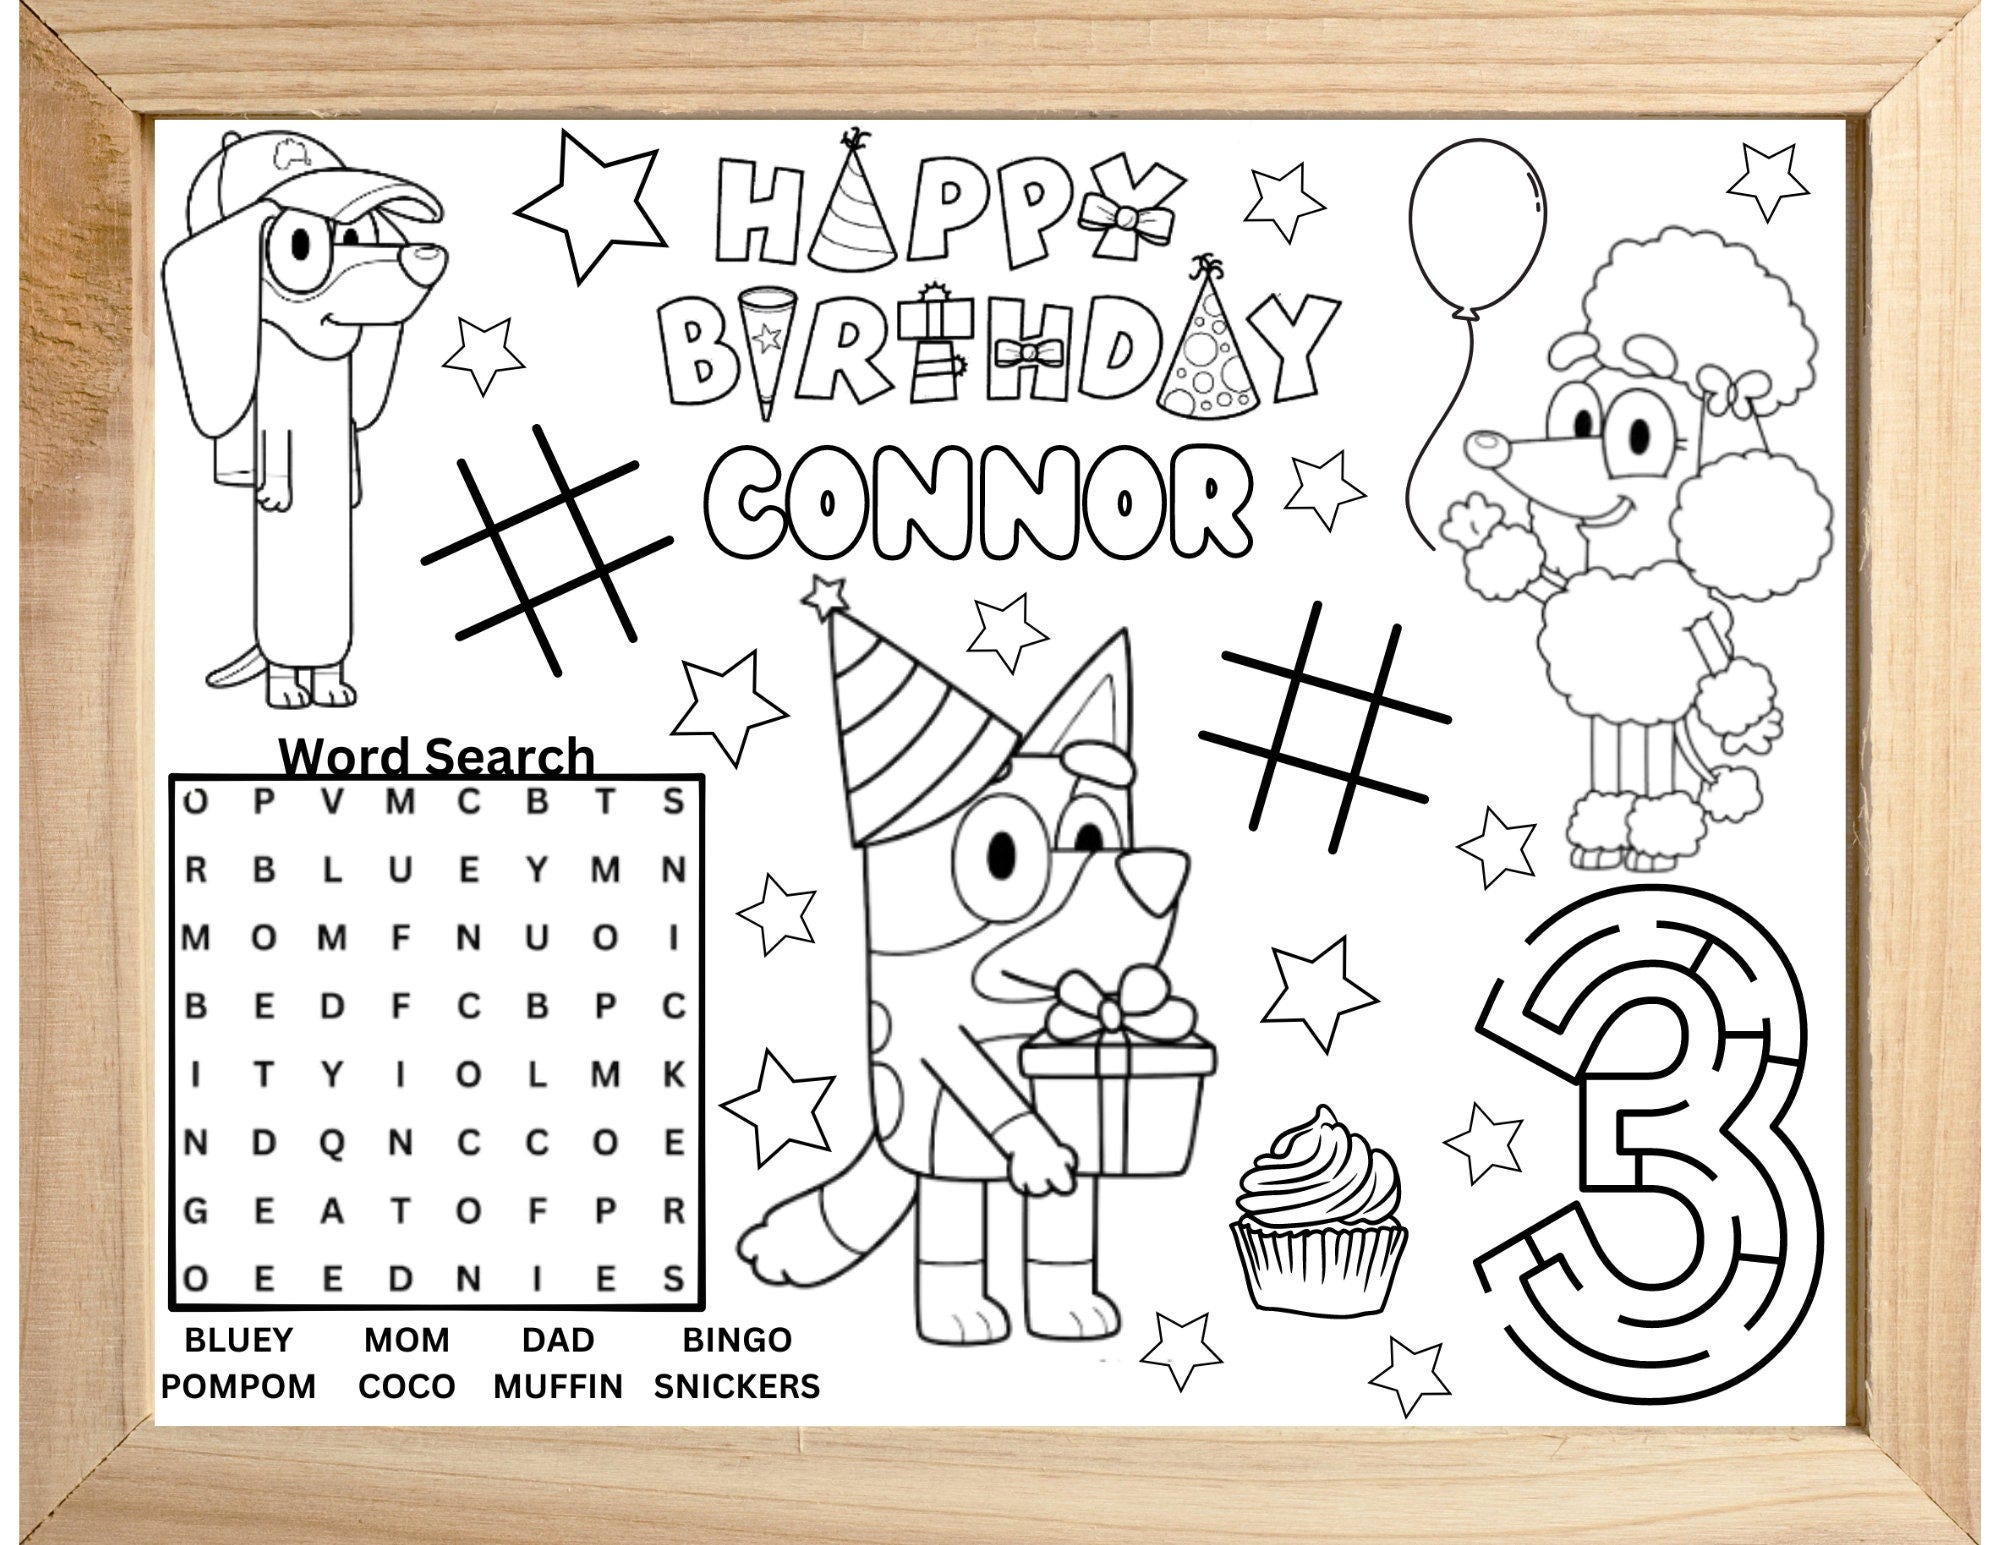 Personalized Bluey Birthday Coloring Placemat, Bluey Birthday Games, Bluey Activity Page, Bluey and Bingo Birthday Favor, Bluey Birthday